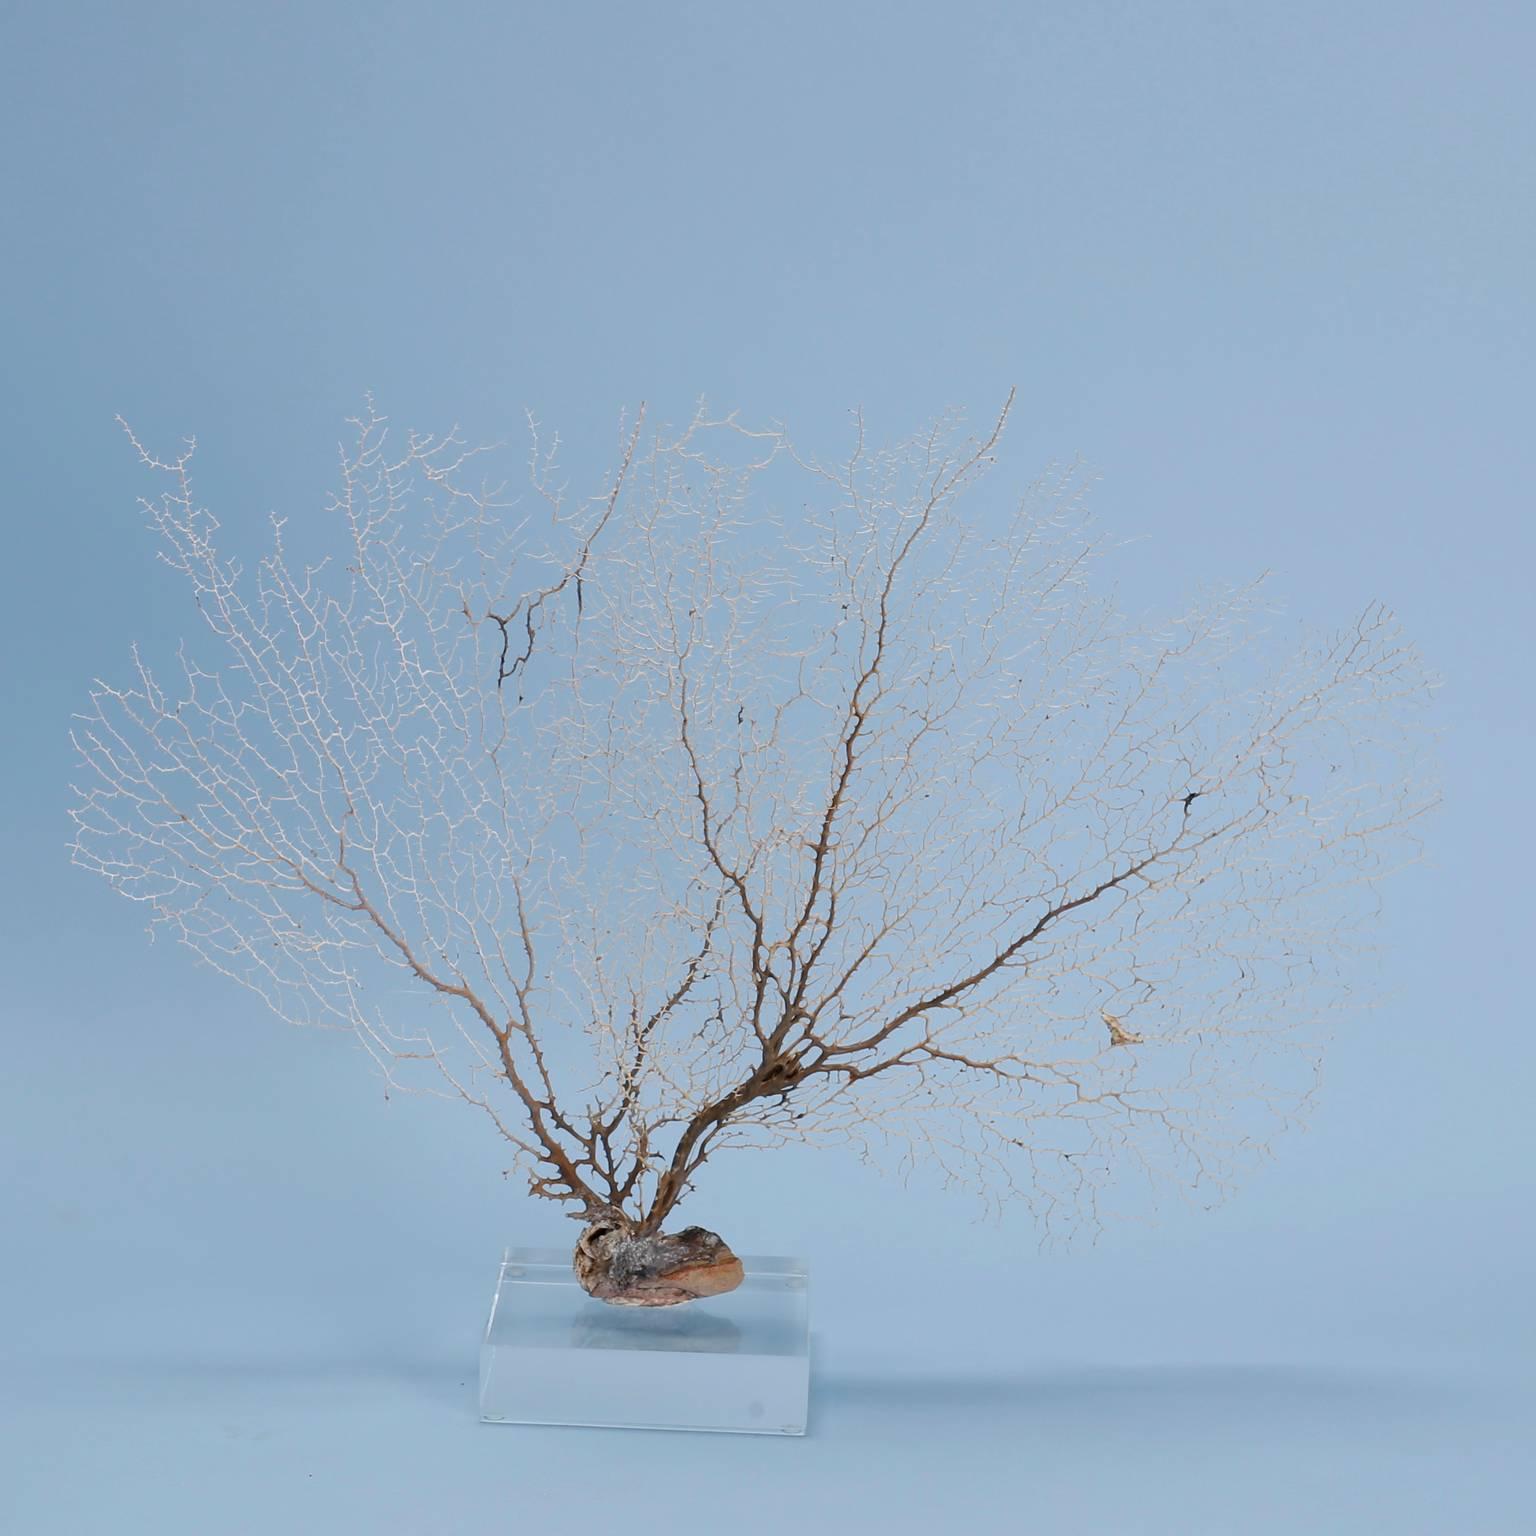 Organic Modern Off-White Sea Fan Mounted on Lucite